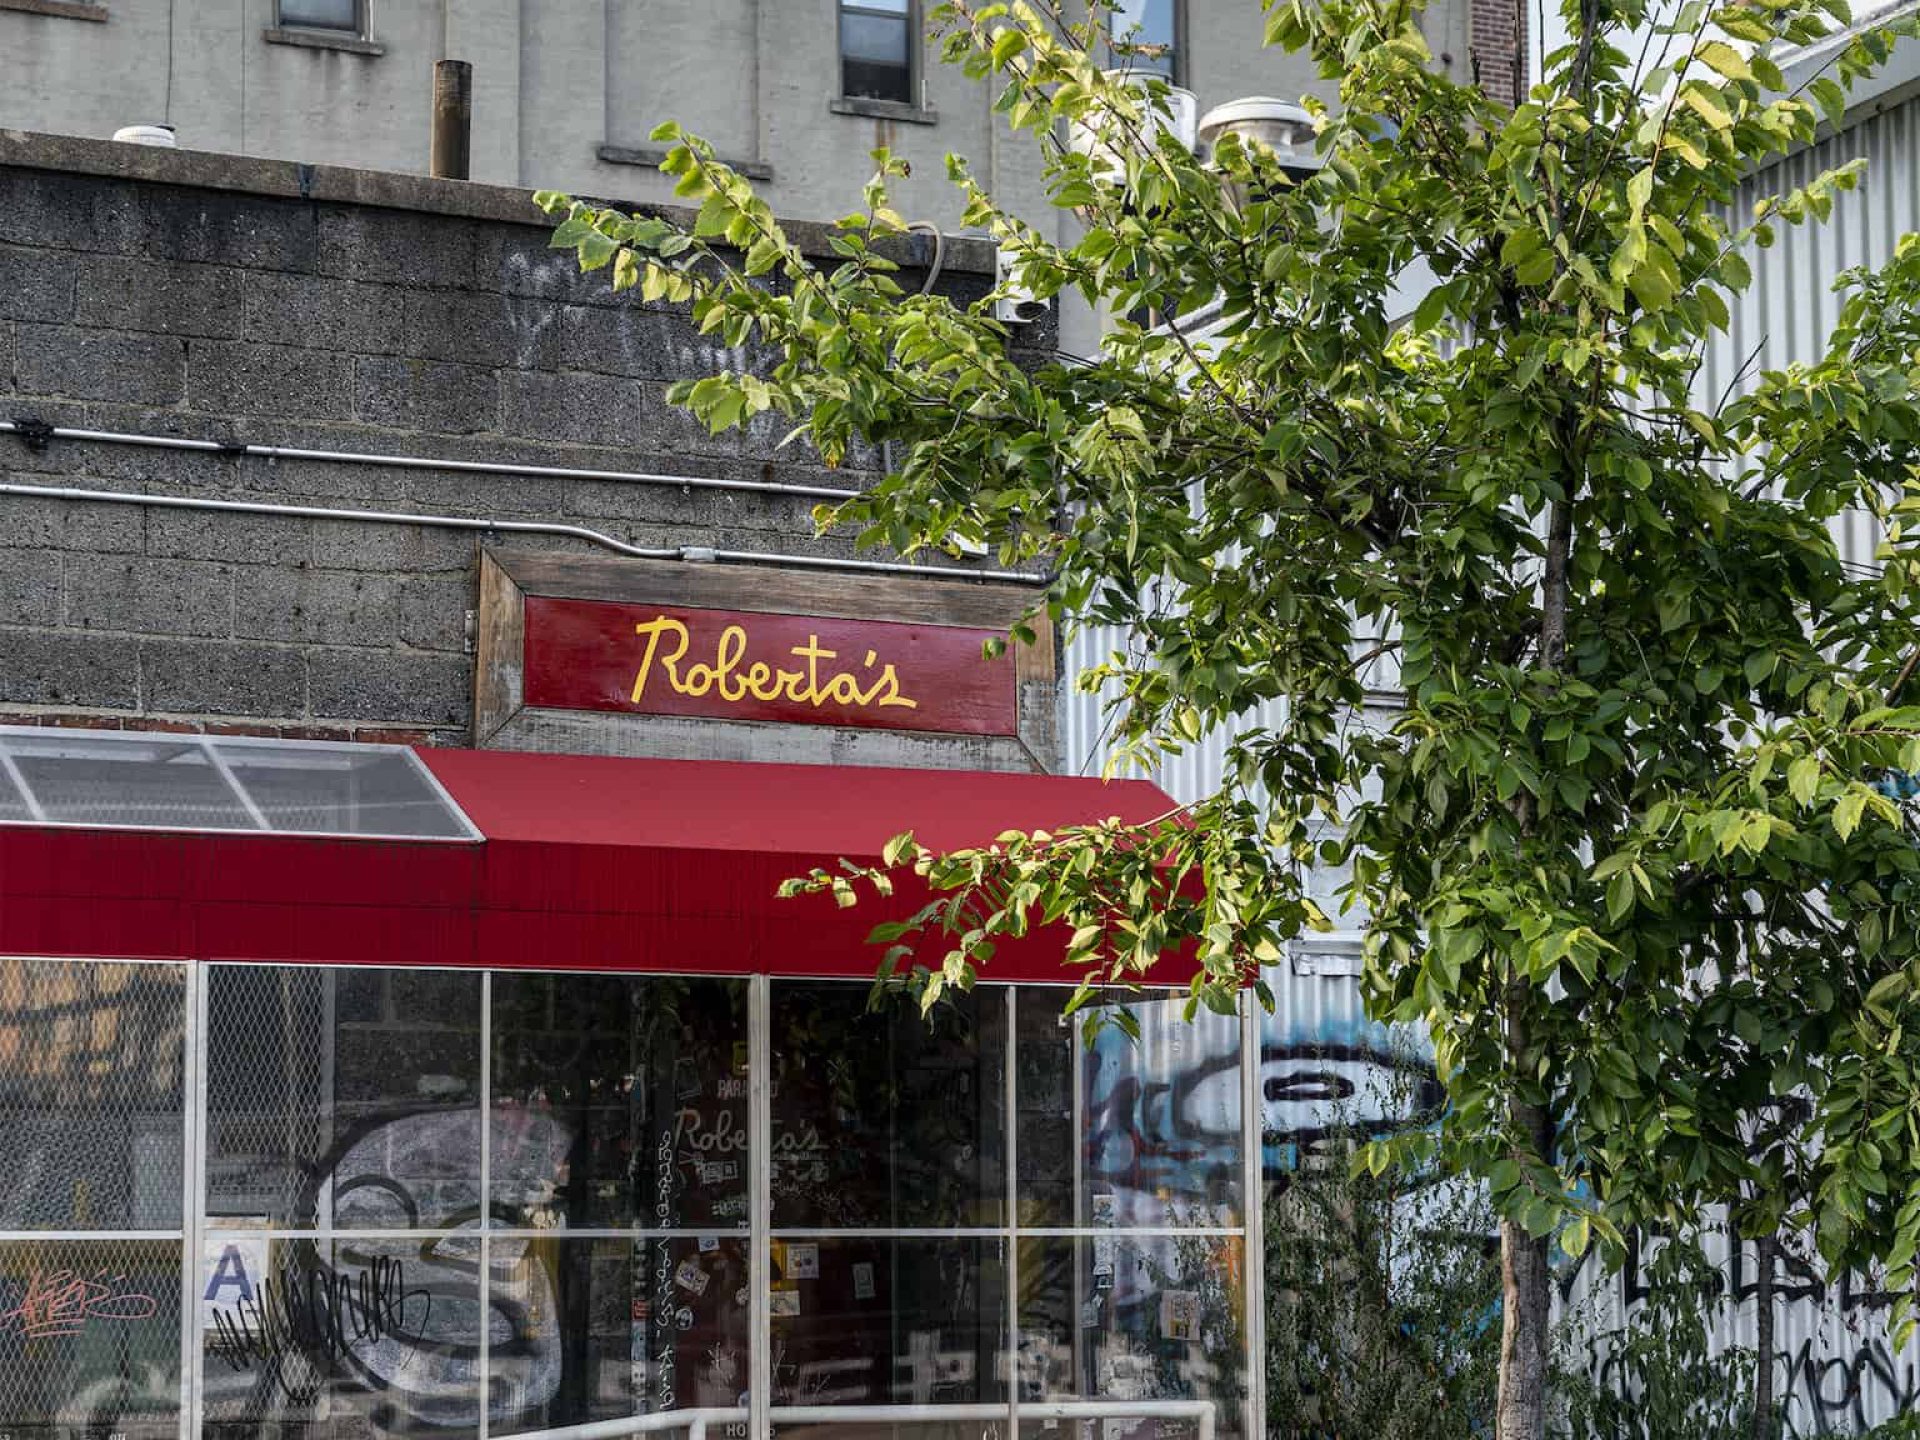 Exterior of Roberta's restaurant with covered entry with red awning and red sign with company name in yellow letters.